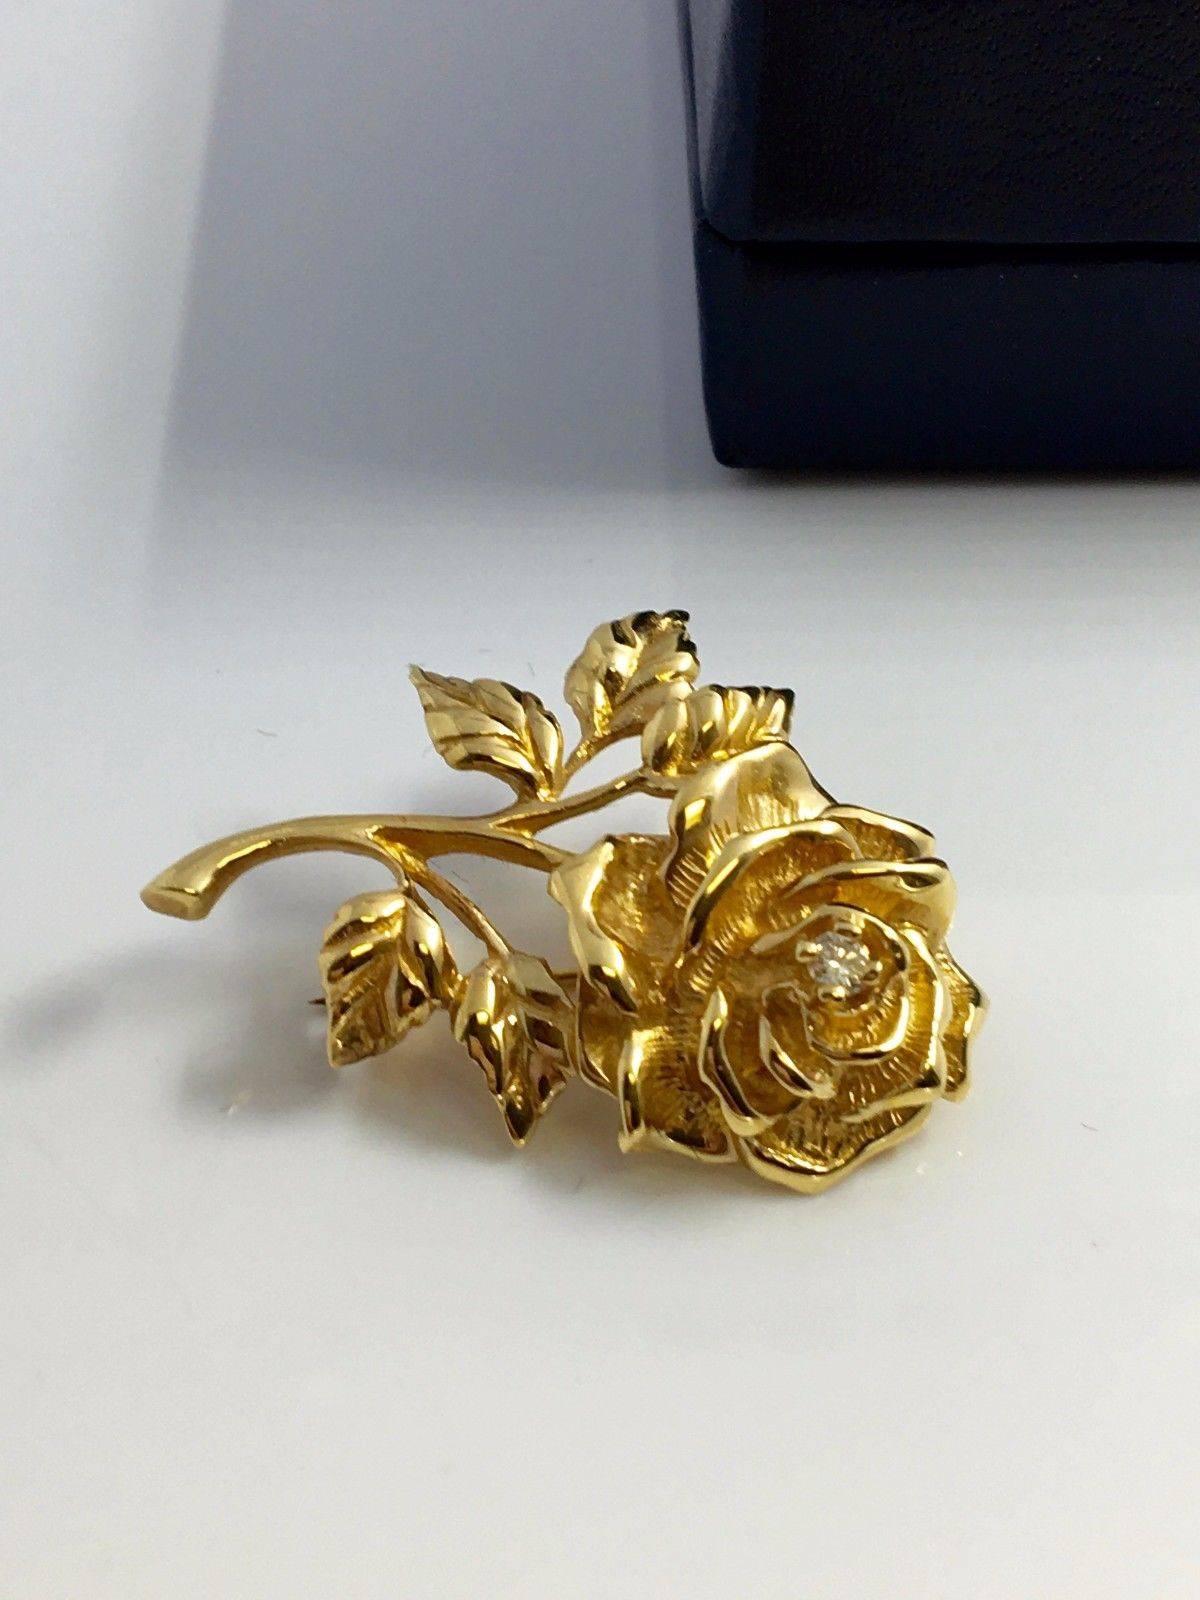 Tiffany & Co. 14k Yellow Gold Round Cut Diamond Rose Flower Brooch Pin With Box

You are bidding on an Authentic! Tiffany & Co Yellow Gold 14k Rose Flower Diamond Earrings that are Vintage and extremely rare to find!

More About the